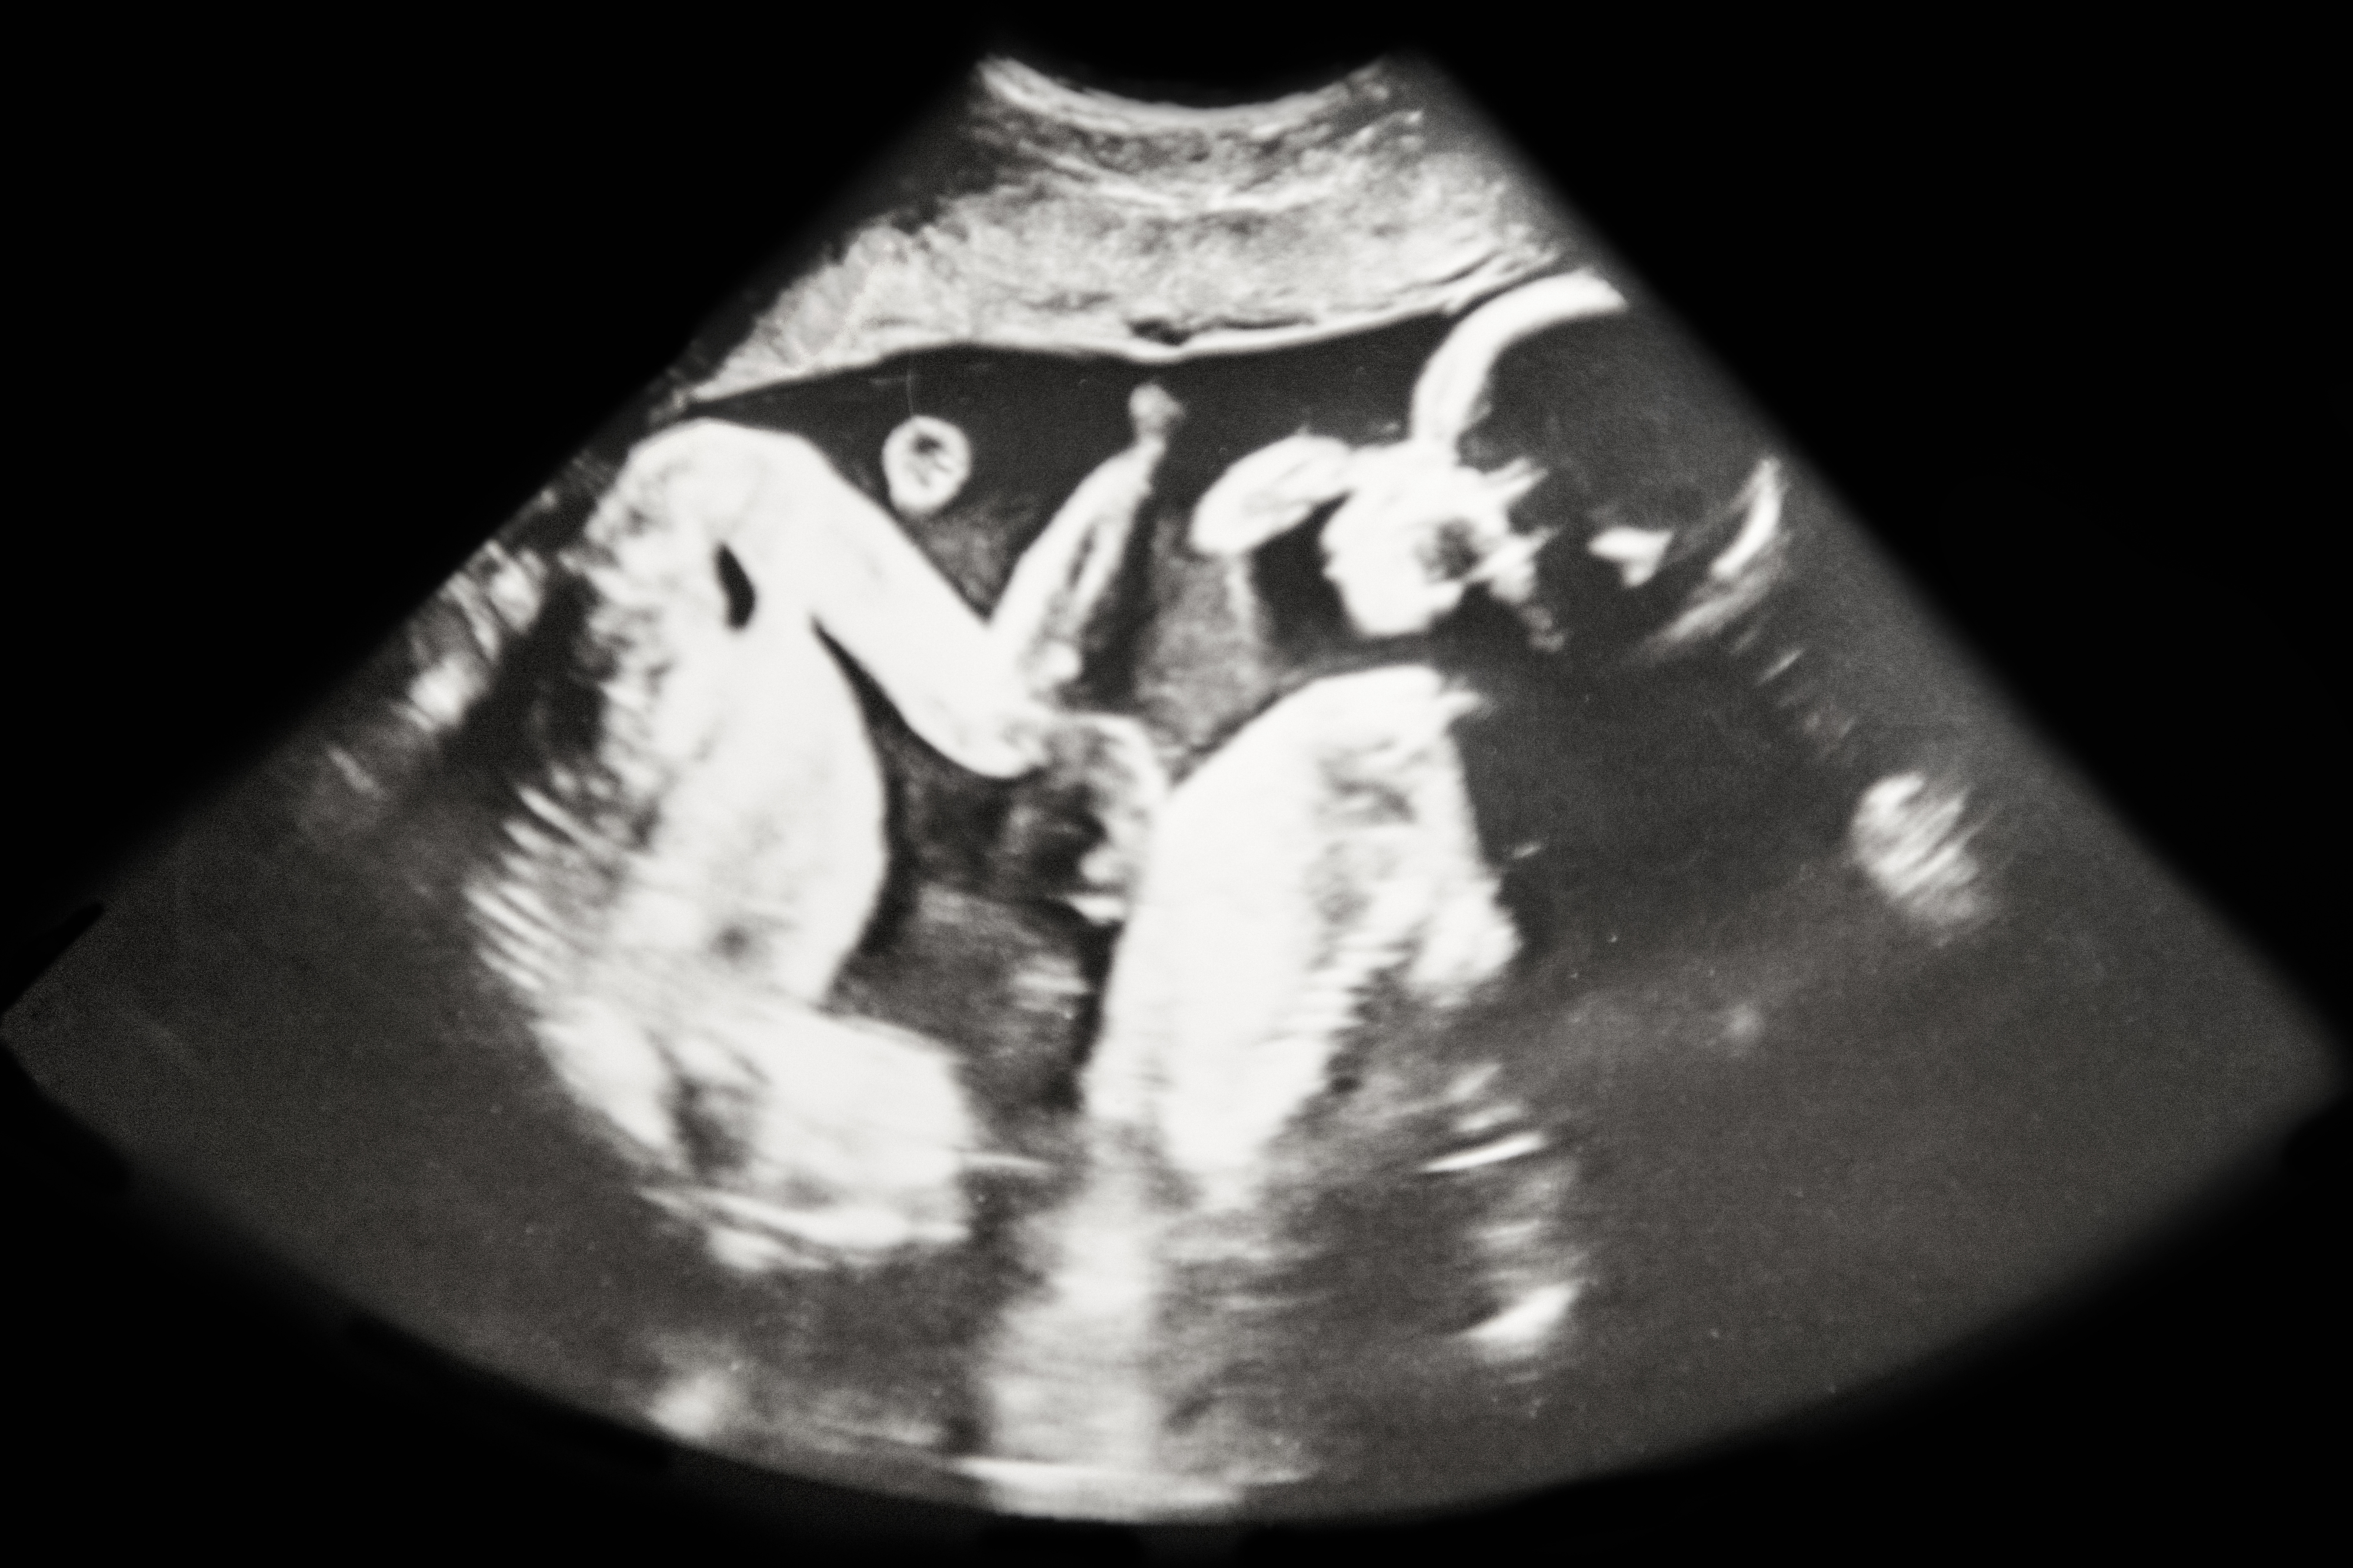 ultrasound showing two babies in the womb